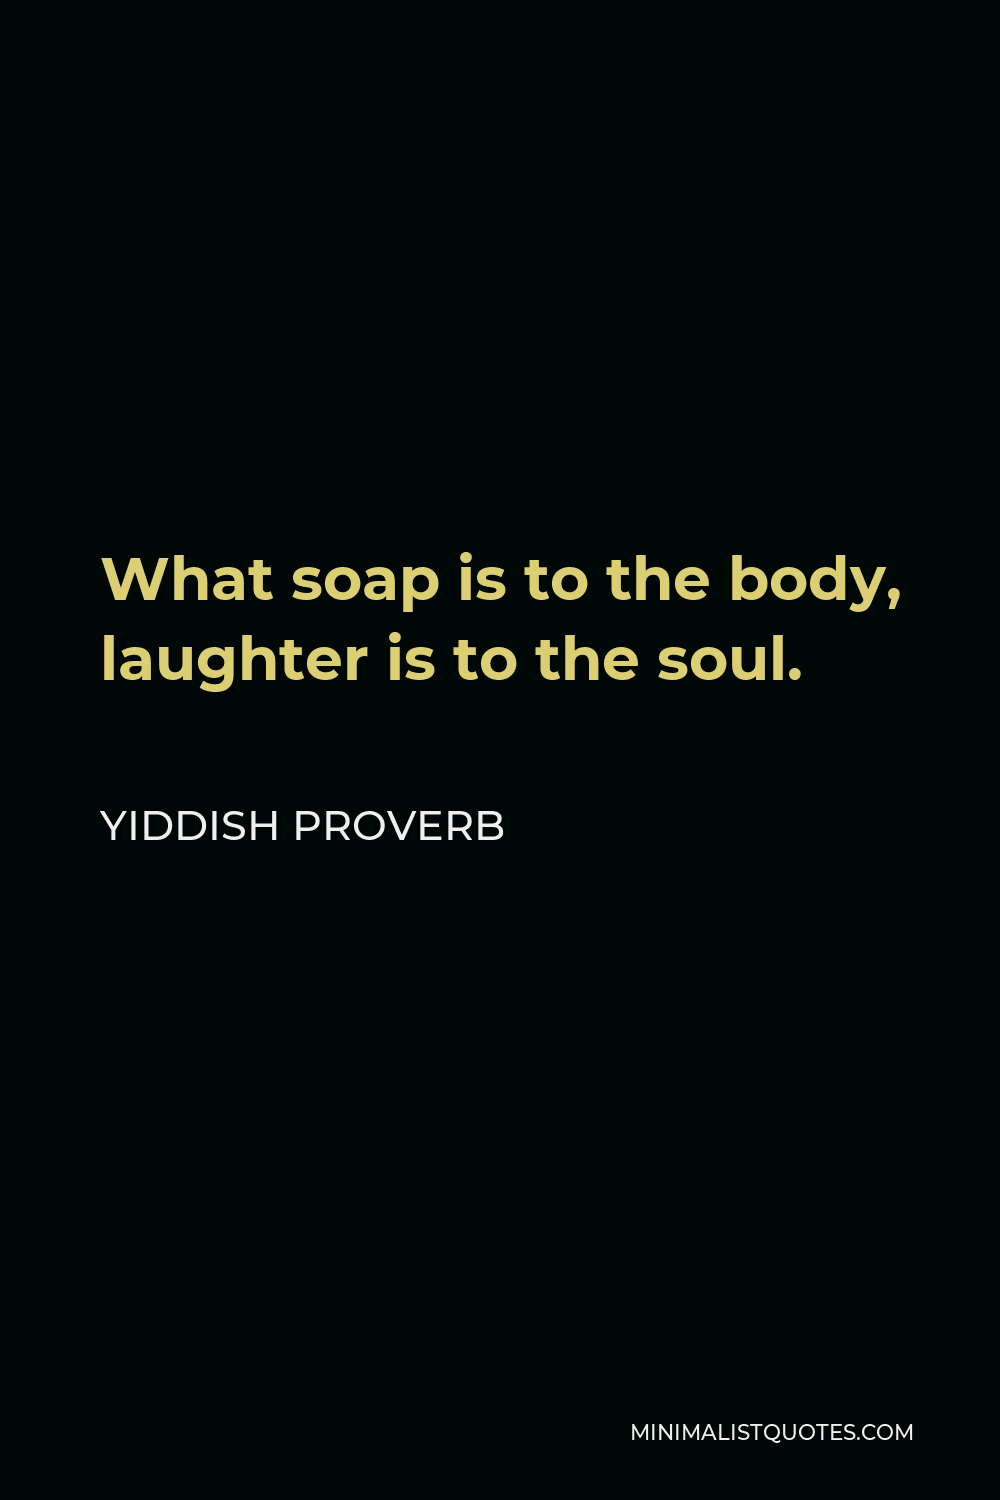 Yiddish Proverb Quote - What soap is to the body, laughter is to the soul.